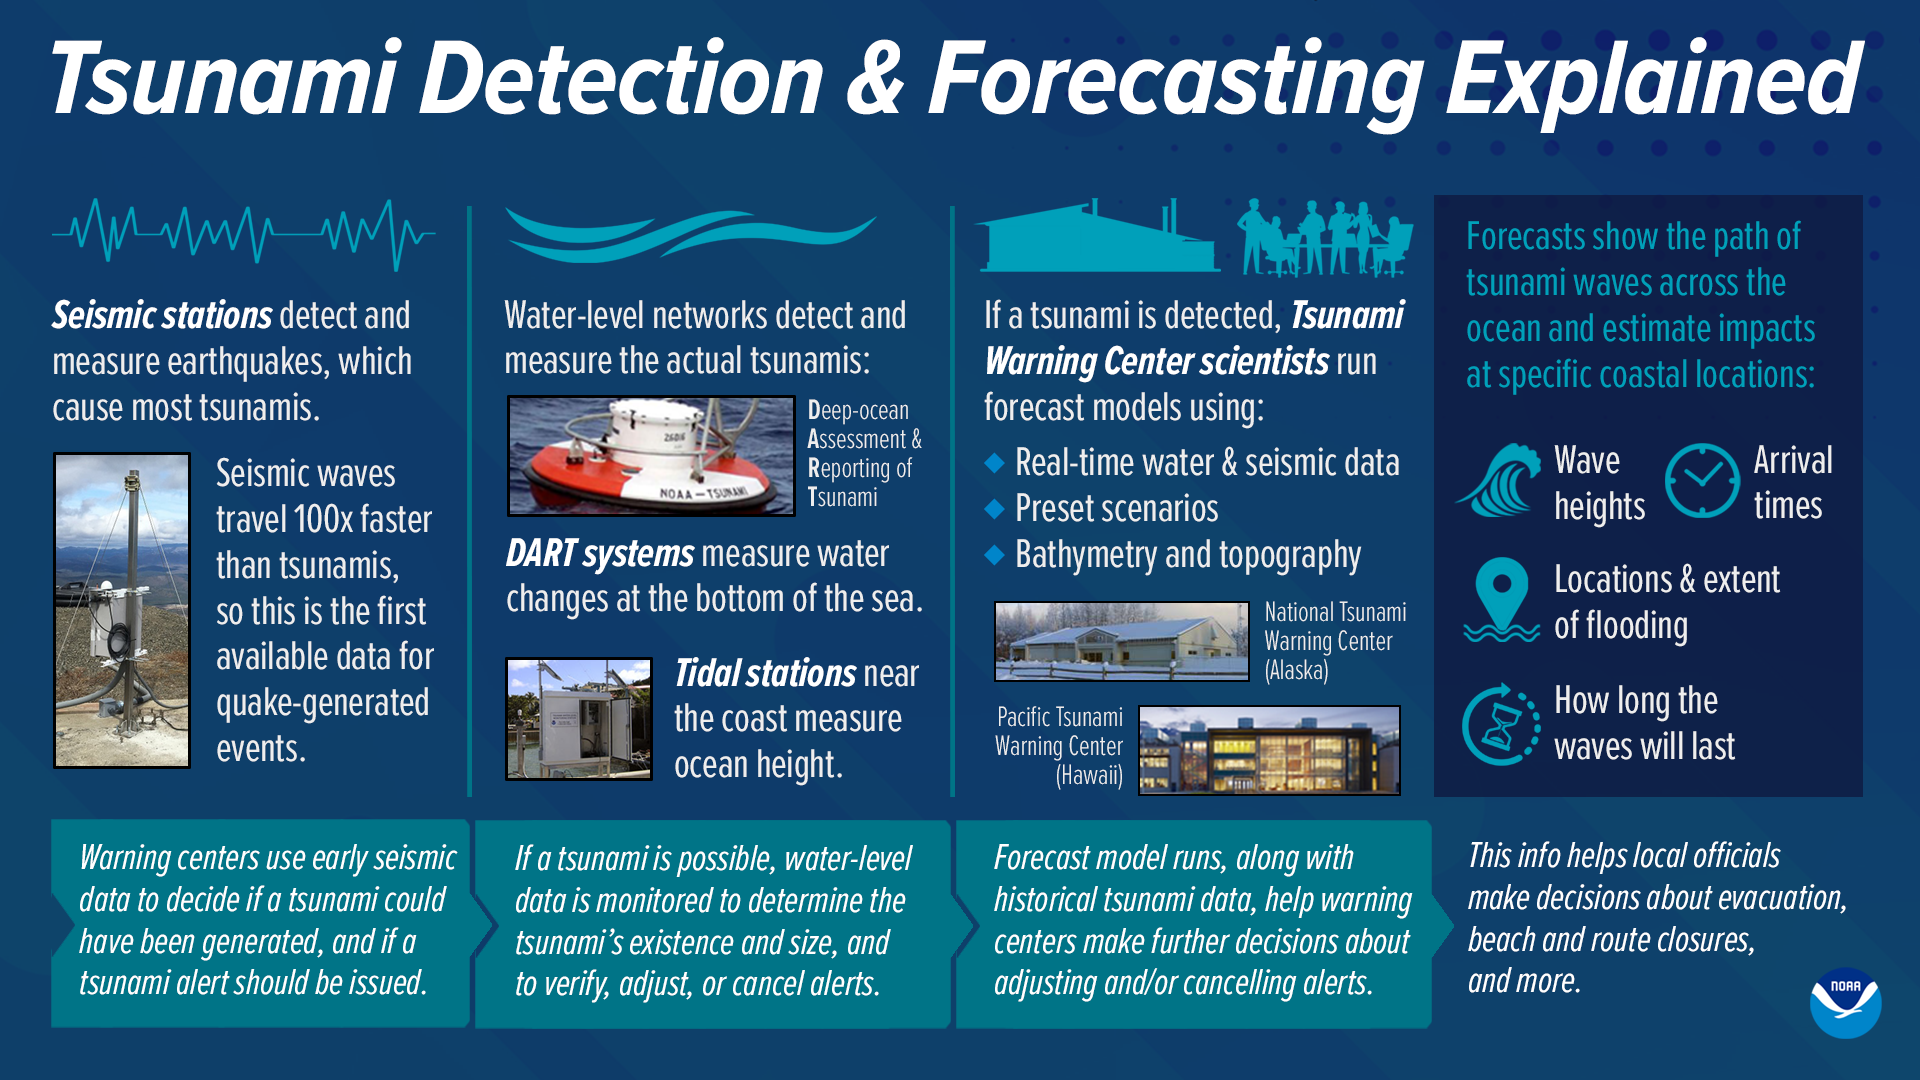 Tsunami Detection & Forecasting Explained. Seismic stations detect and measure earthquakes, which cause most tsunamis. Seismic waves travel 100x faster than tsunamis, so this is the first available data for quake-generated events. Water-level networks detect and measure the actual tsunamis. DART systems measure water changes at the bottom of the sea. Tidal stations near the coast measure ocean height. If a tsunami is detected, Tsunami Warning Center scientists run forecast models using real-time water & seismic data, preset scenarios, and bathymetry and topography. Forecsts show the path of tsunami waves across the ocean and estimate impacts at specific coastal locations, including wave heights, arrival times, locations & extent of flooding, and how long the waves will last.